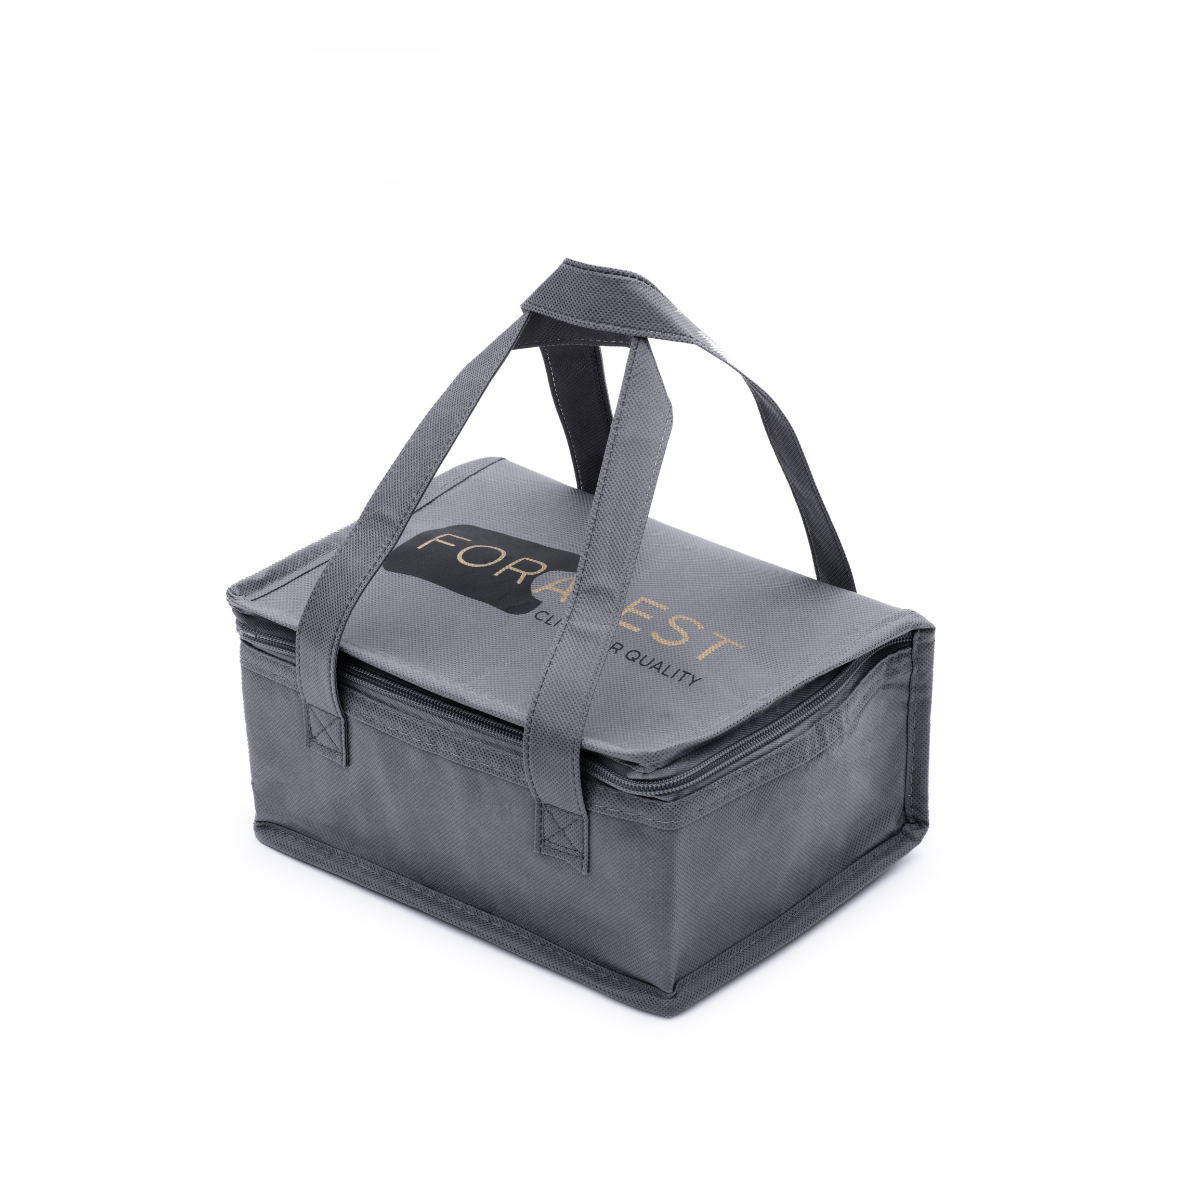 FORABEST 1.8L Electric Lunch Box- Larger Upgraded 50W - Dark Grey-Green